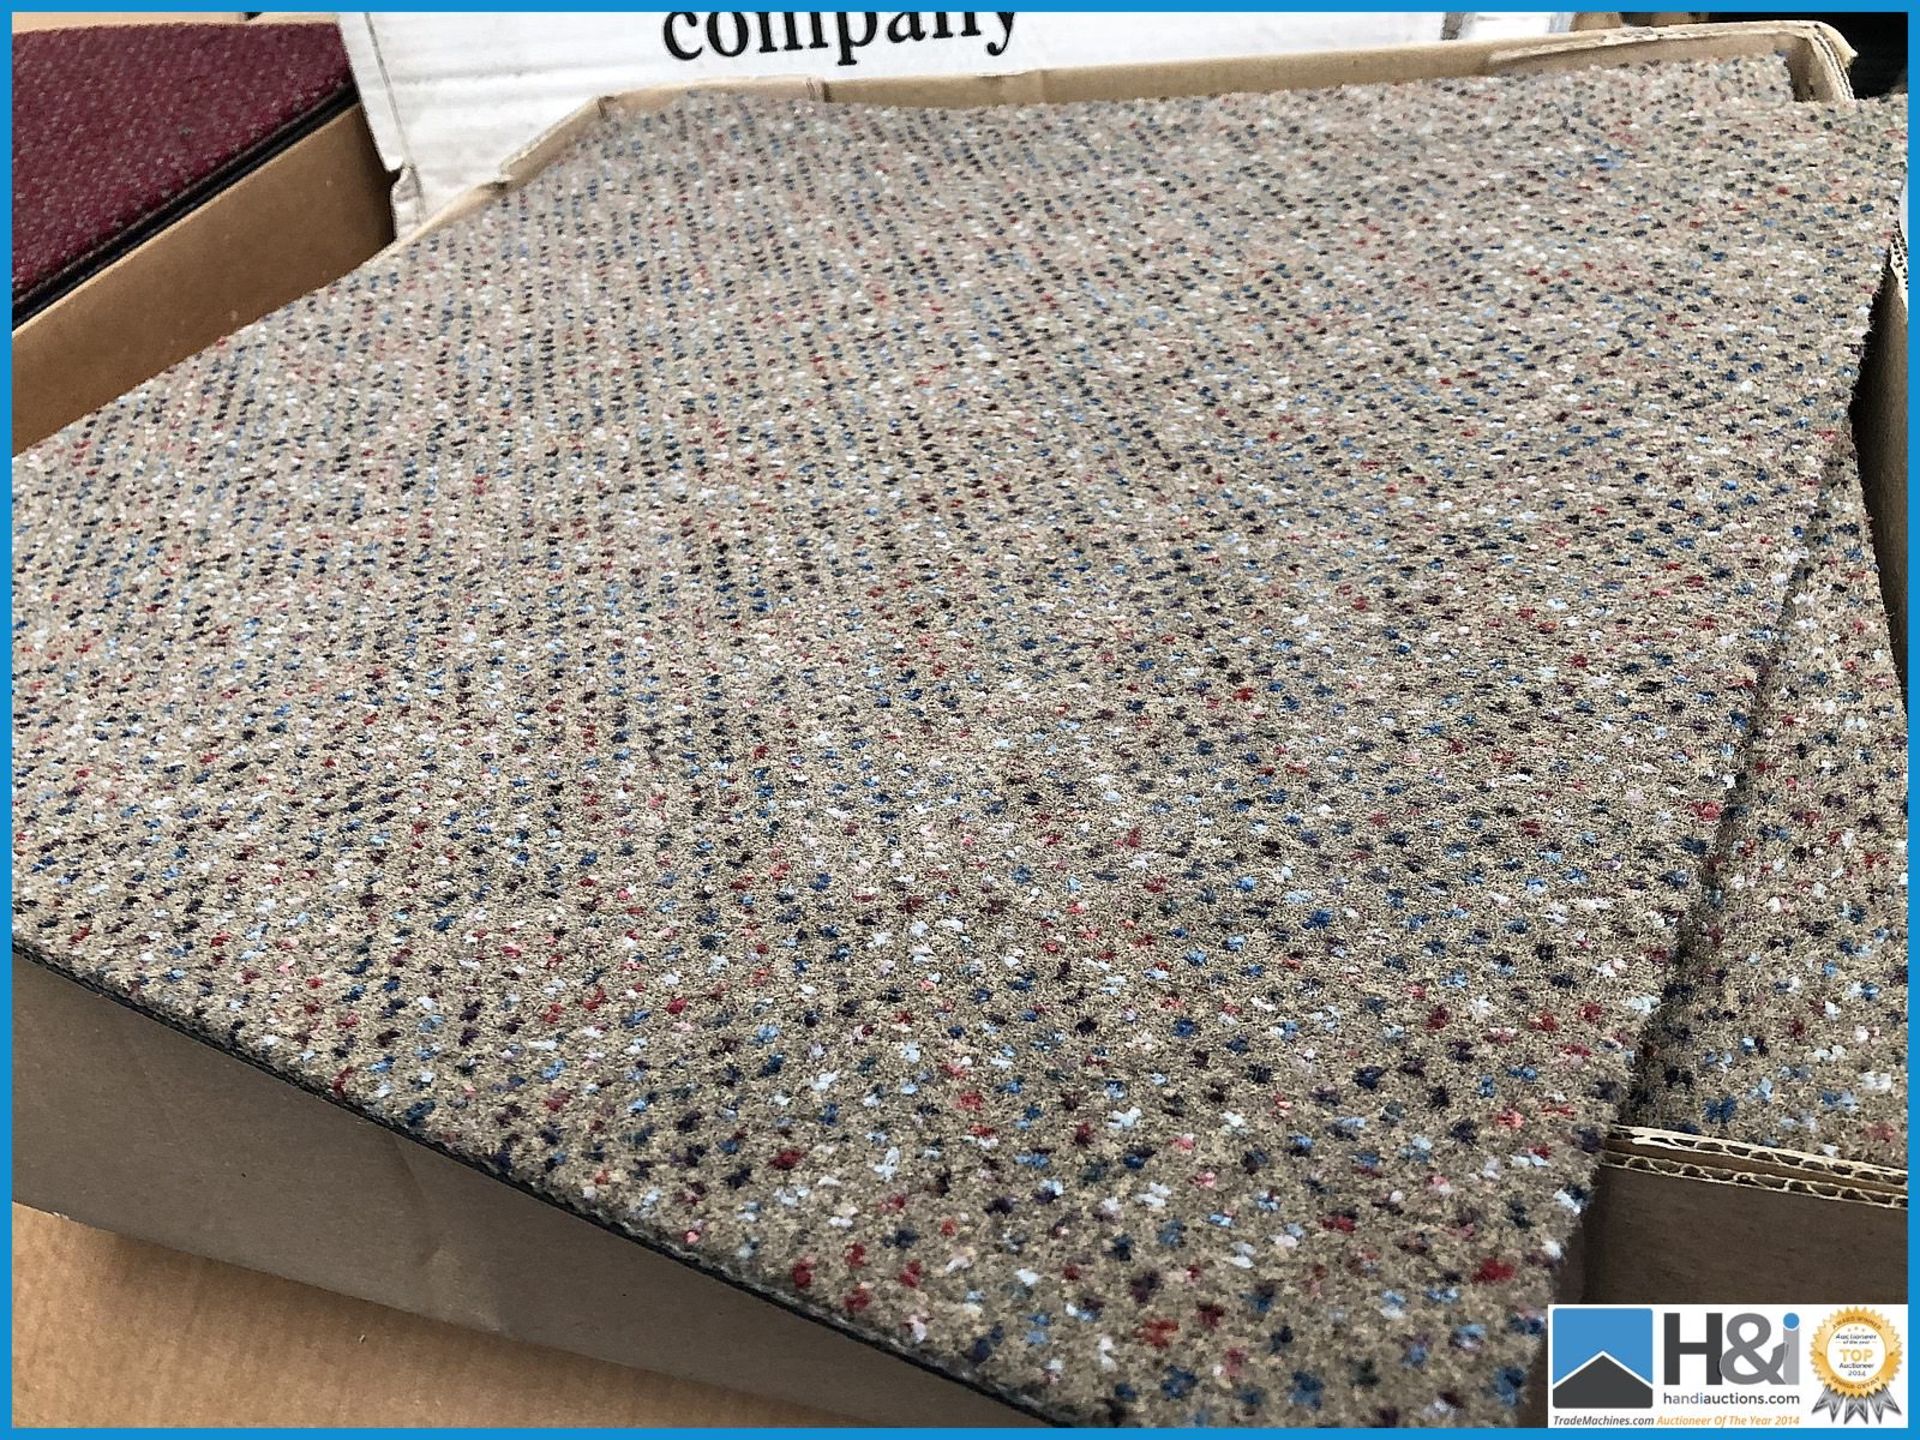 10 boxes of 16 tiles per box. Brand new The Carpet Tile Company Elegy Bamboula. Ultra high quality. - Image 3 of 8